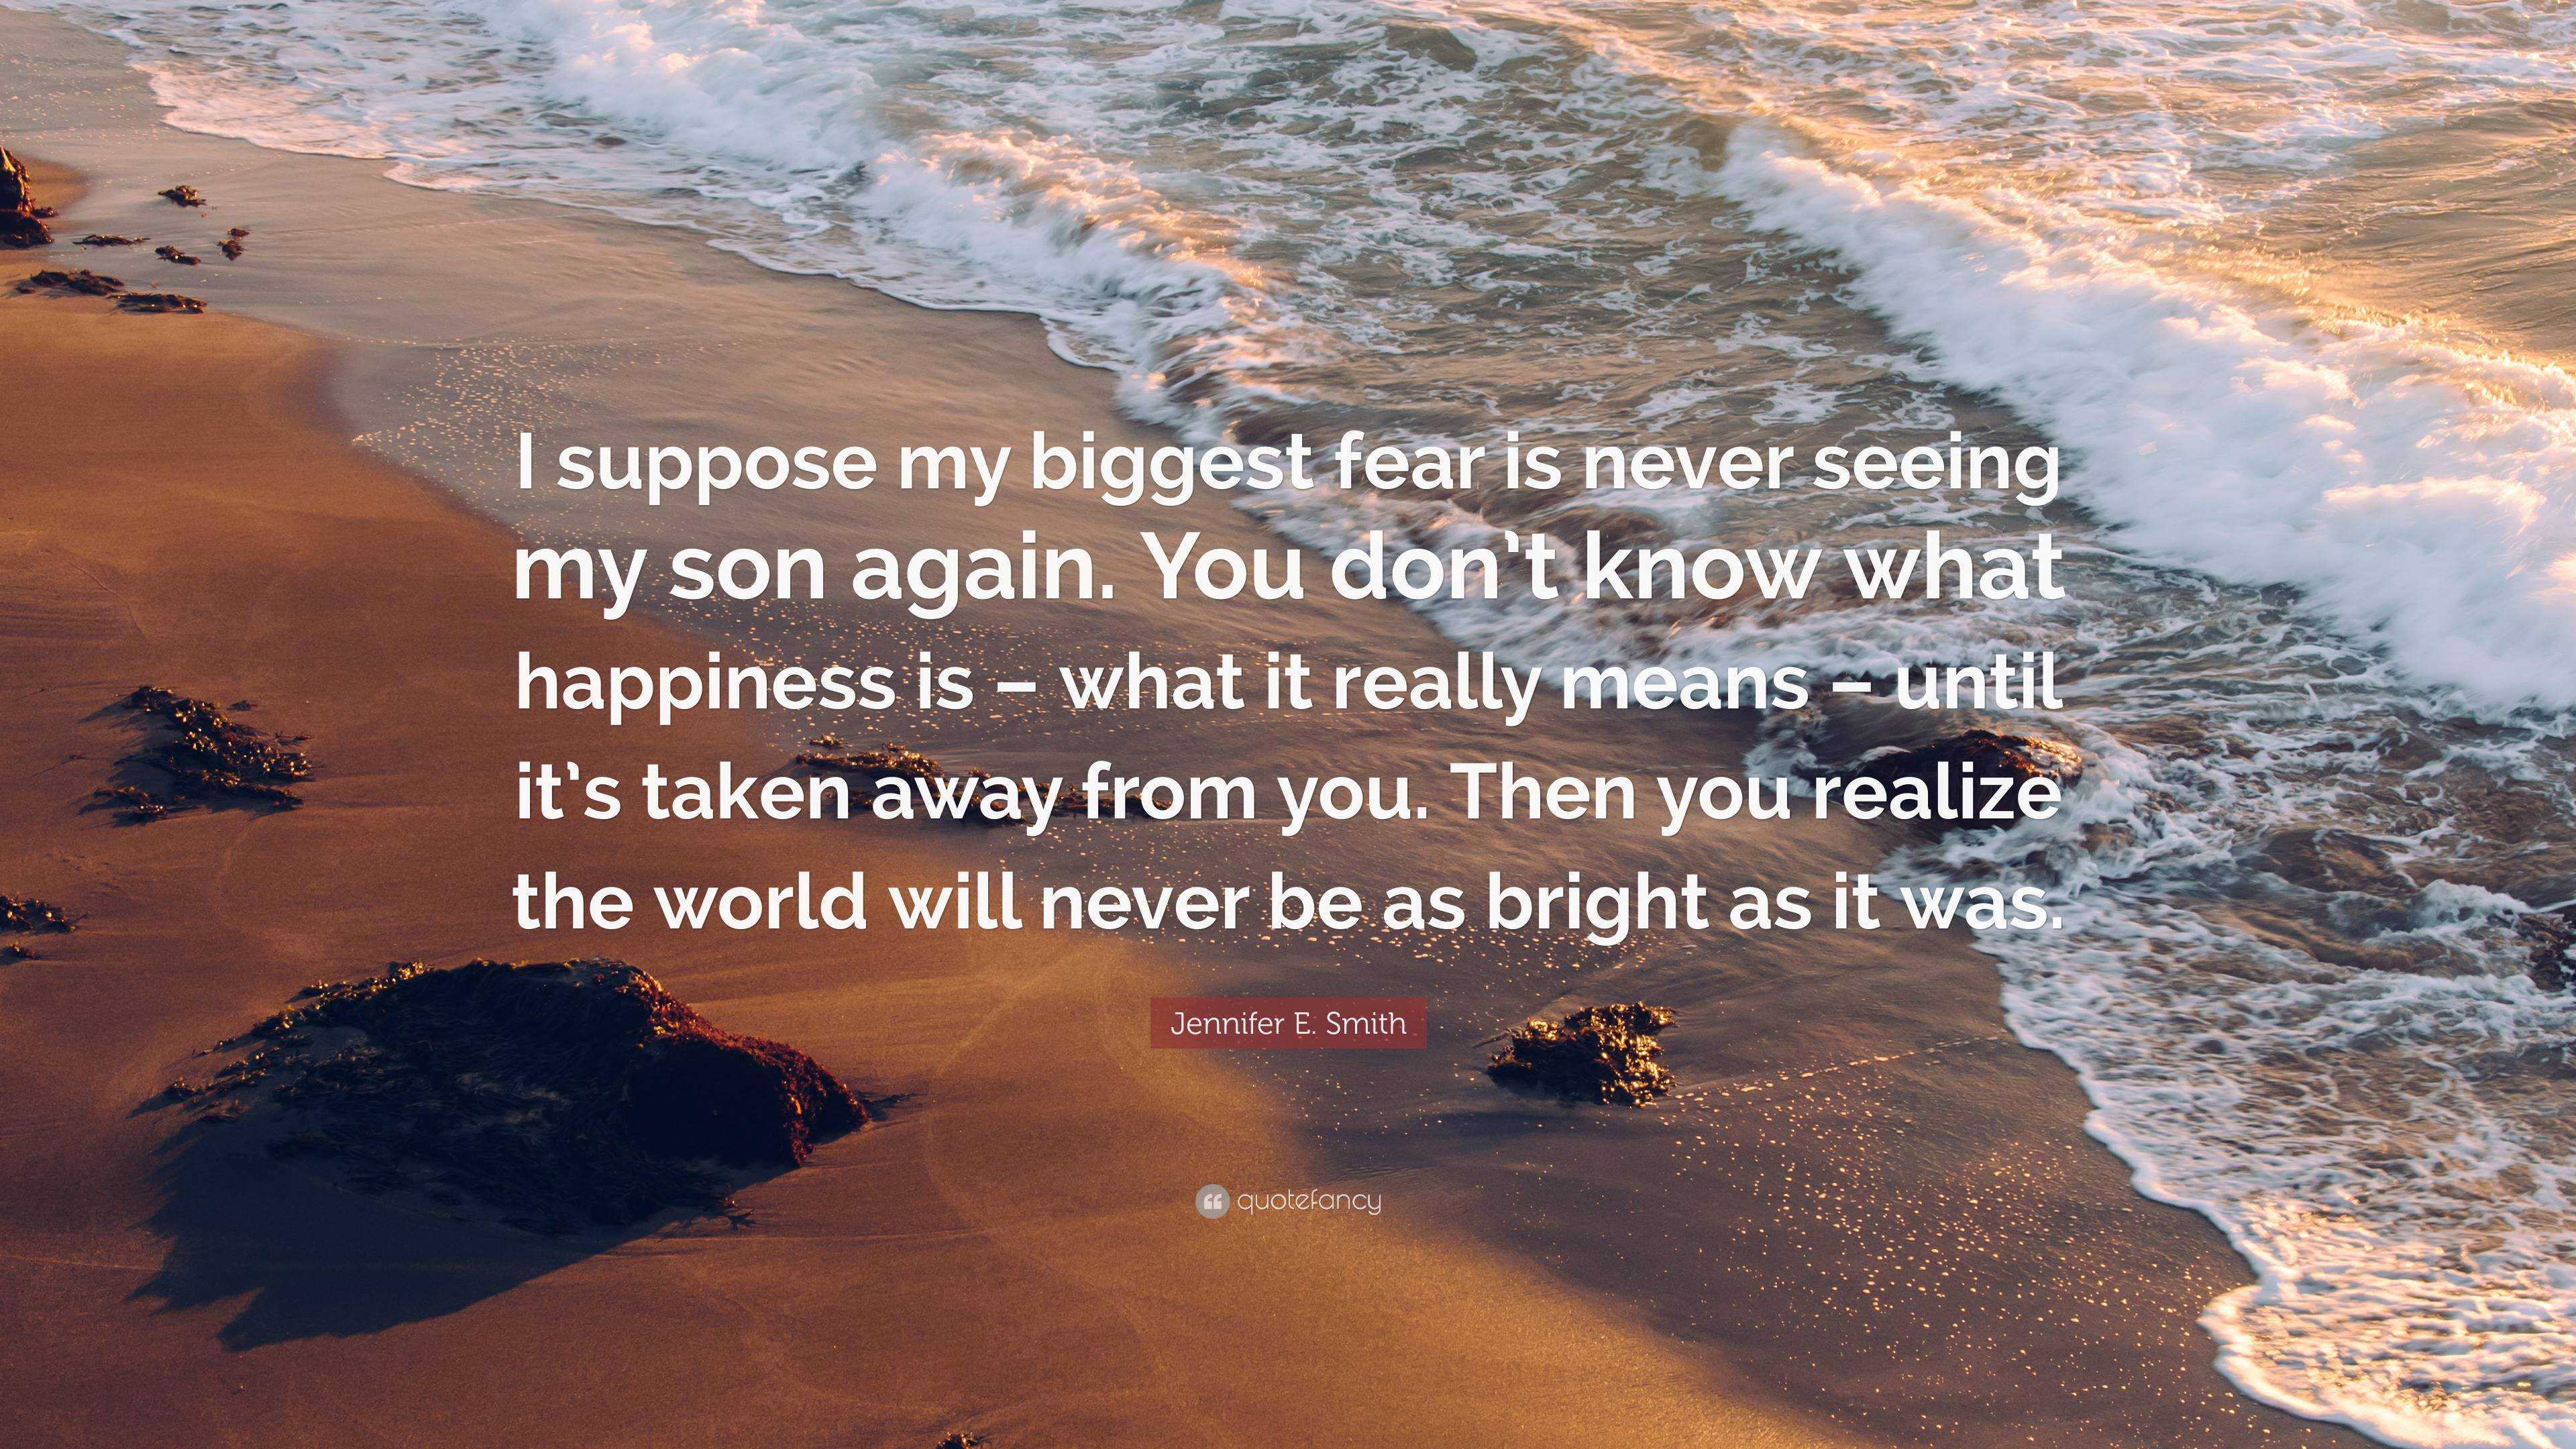 Jennifer E. Smith Quote: “I suppose my biggest fear is never seeing my ...